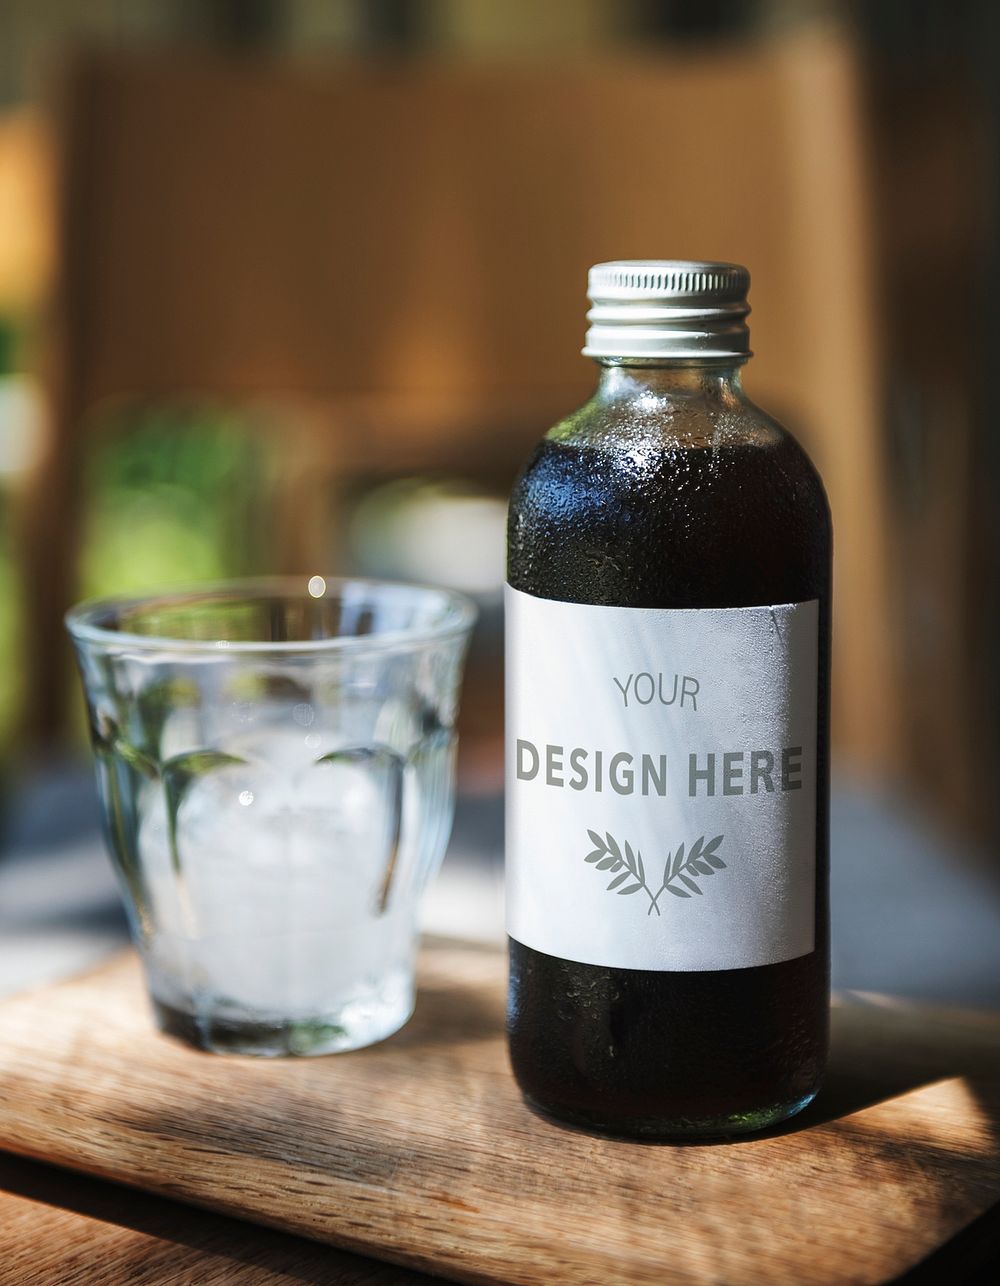 Design space on coffee drink glass bottle